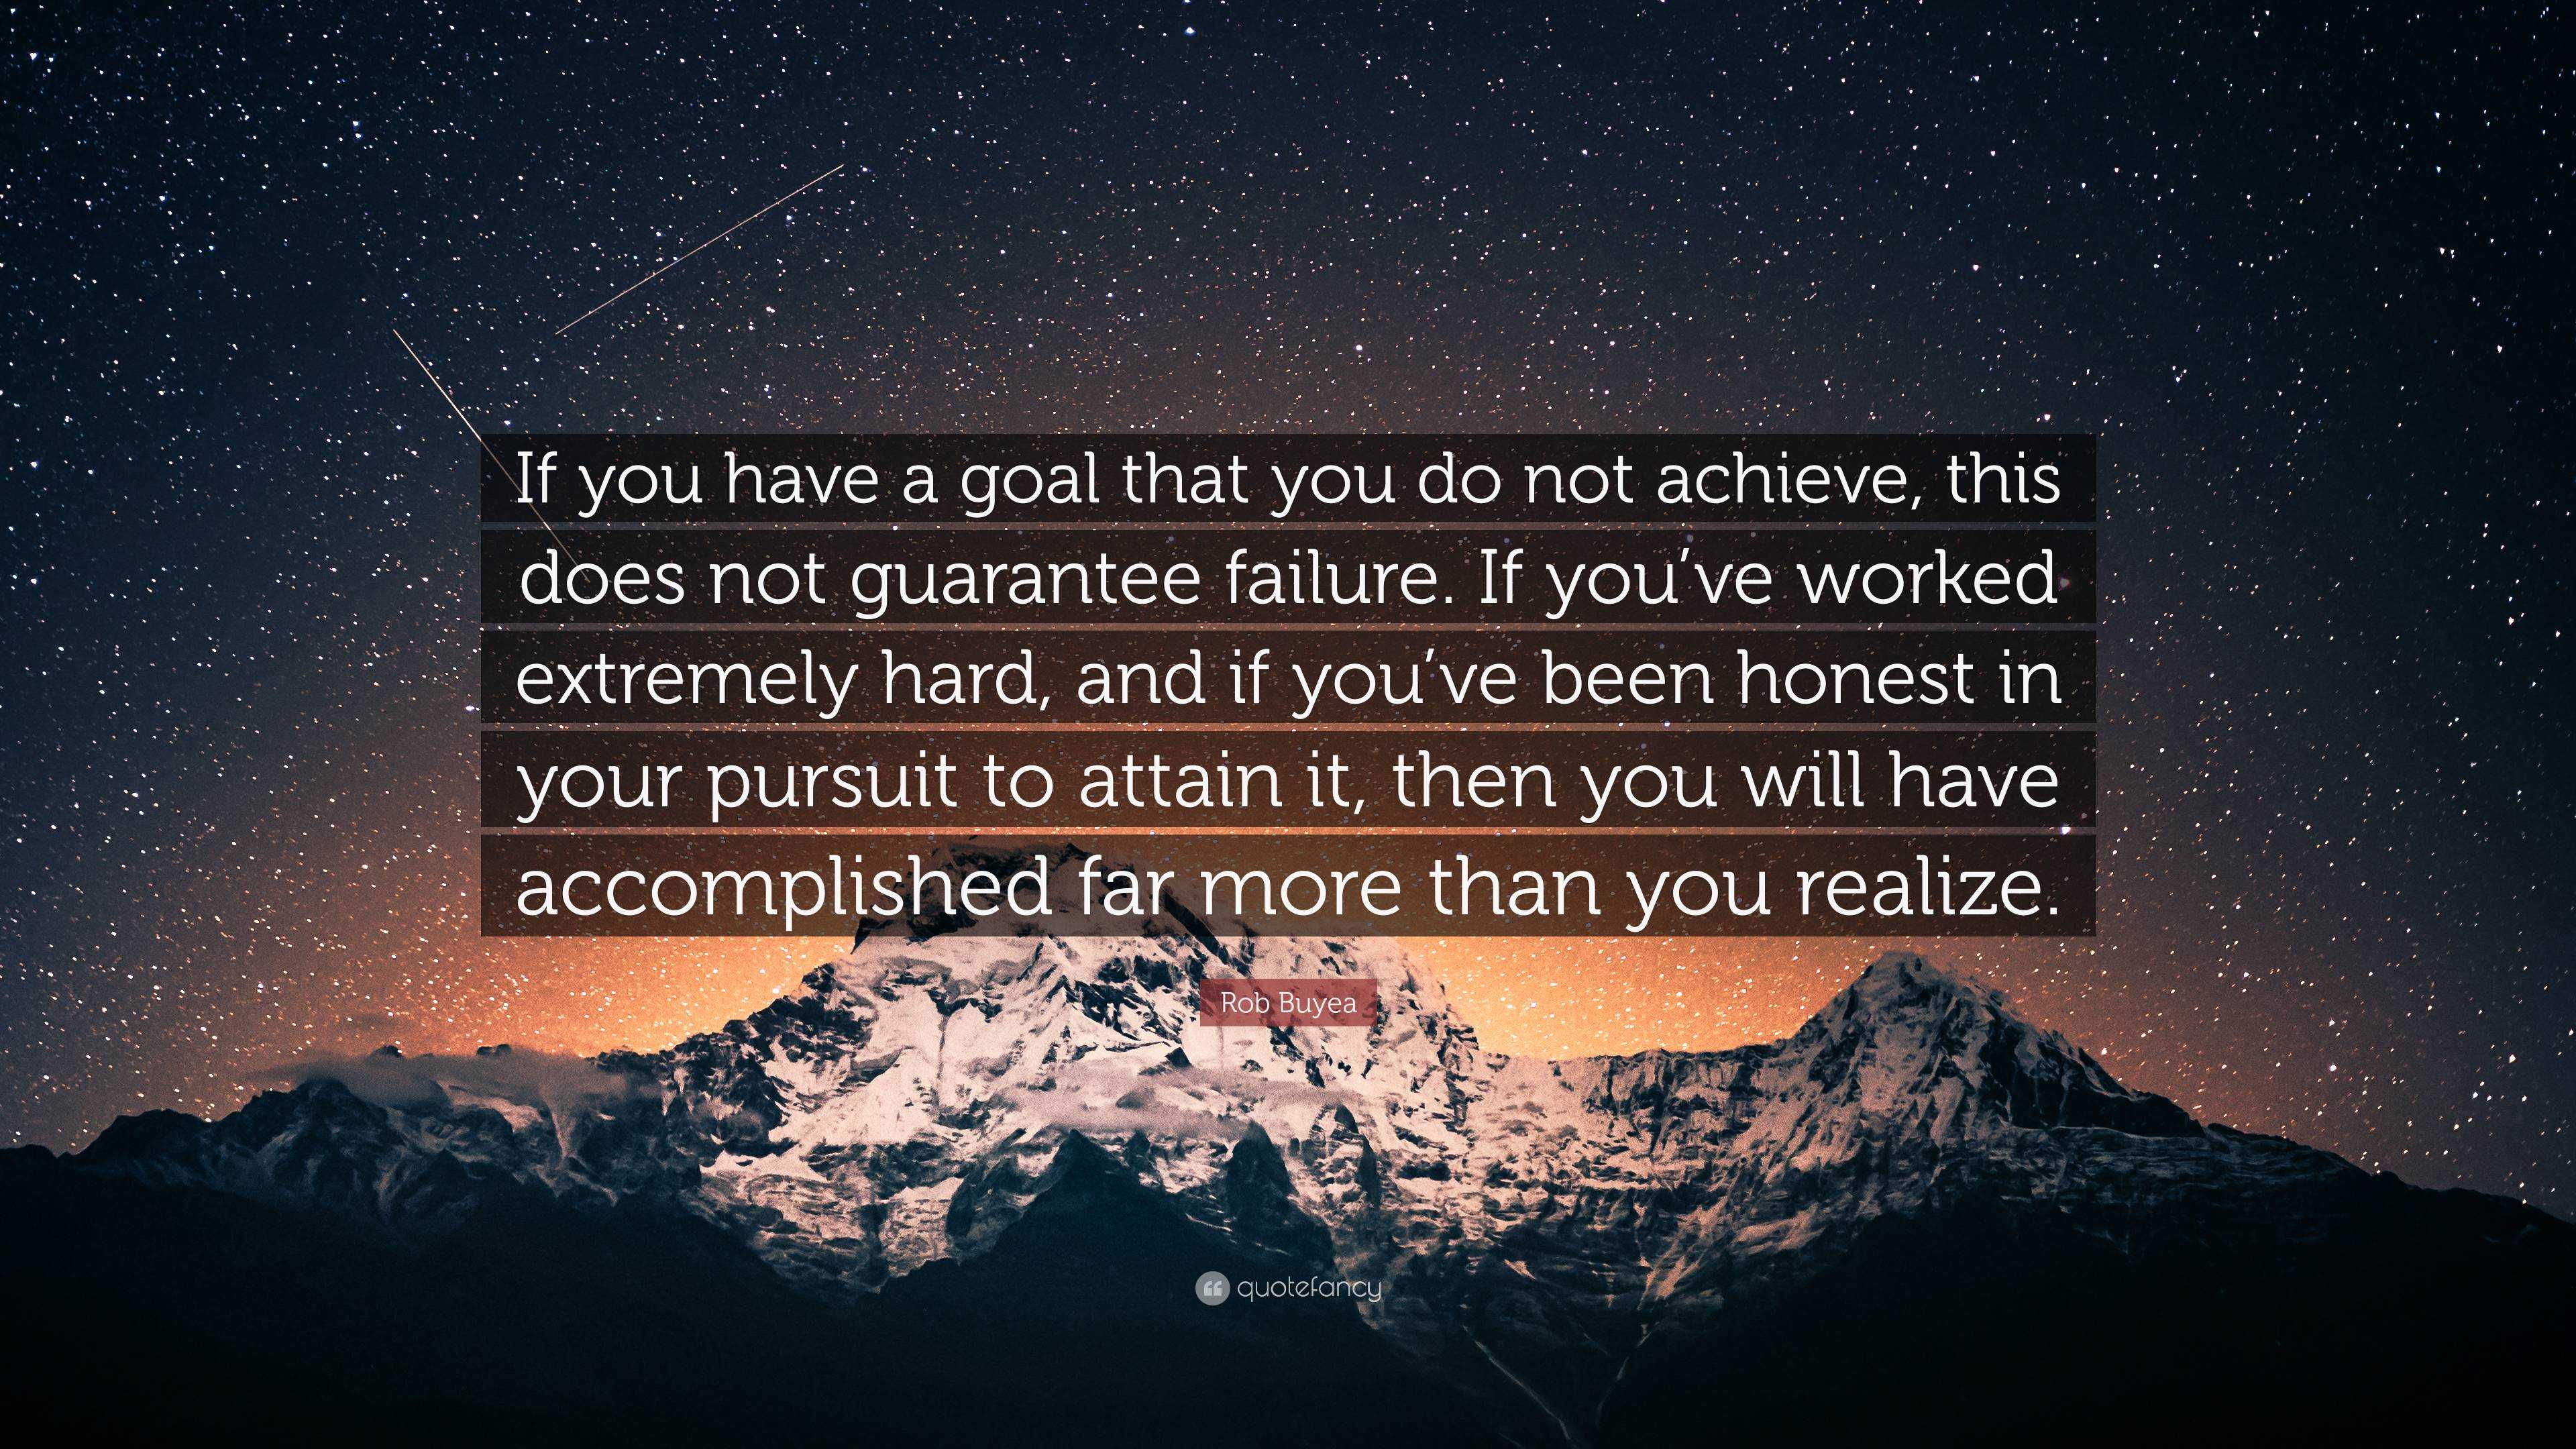 https://quotefancy.com/media/wallpaper/3840x2160/7046758-Rob-Buyea-Quote-If-you-have-a-goal-that-you-do-not-achieve-this.jpg